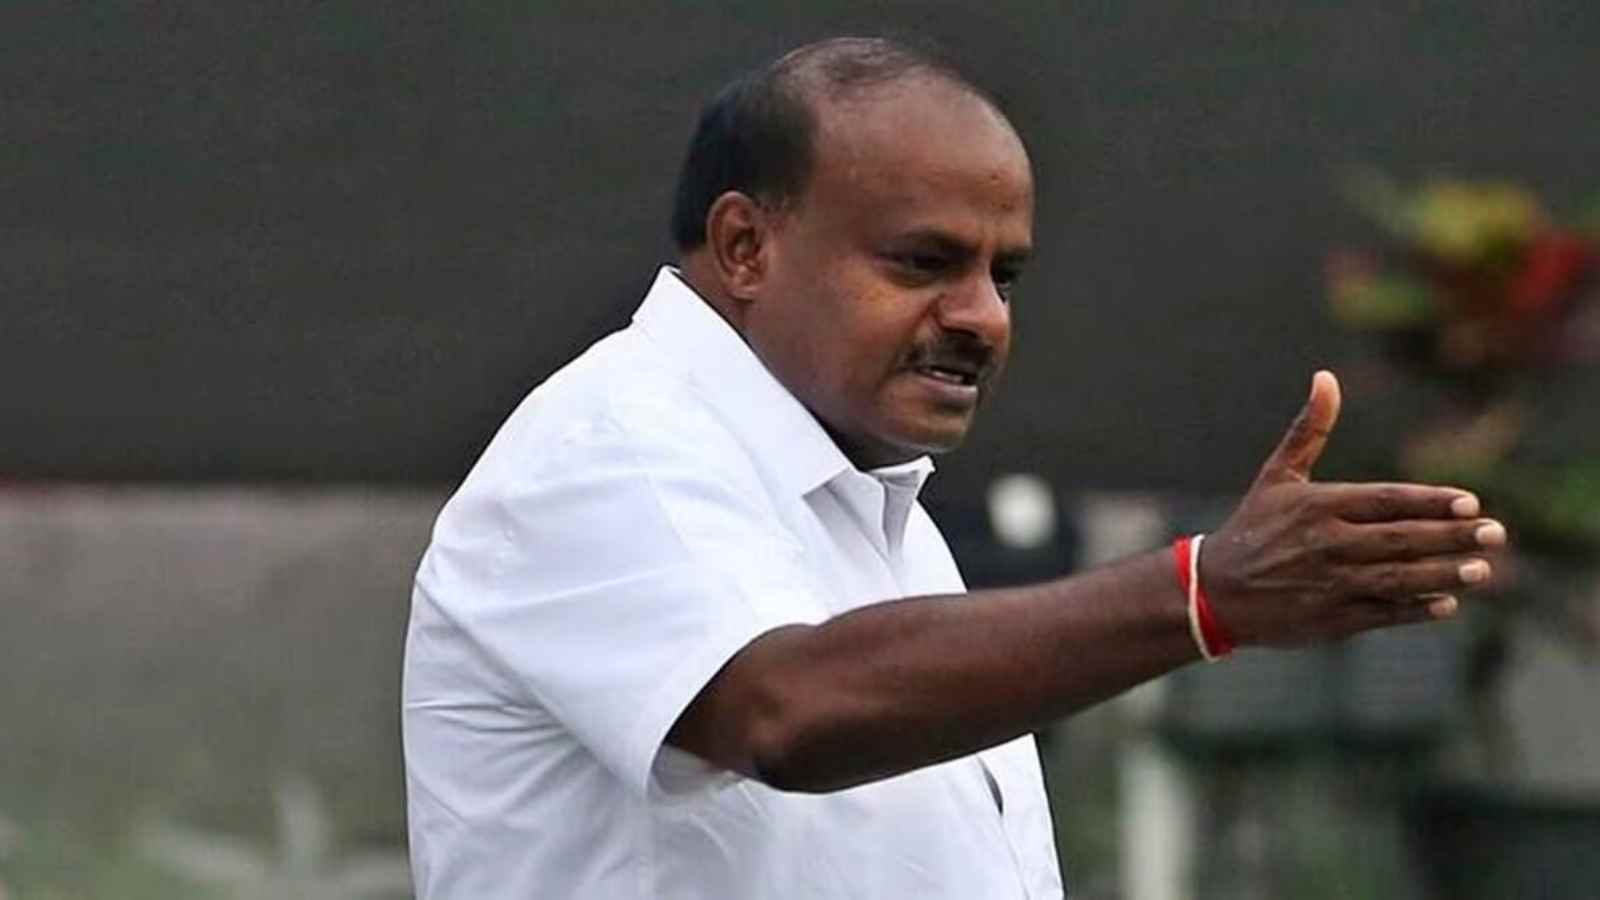 Let facts come out after probe: Ex-CM Kumaraswamy on nephew’s alleged explicit video clips